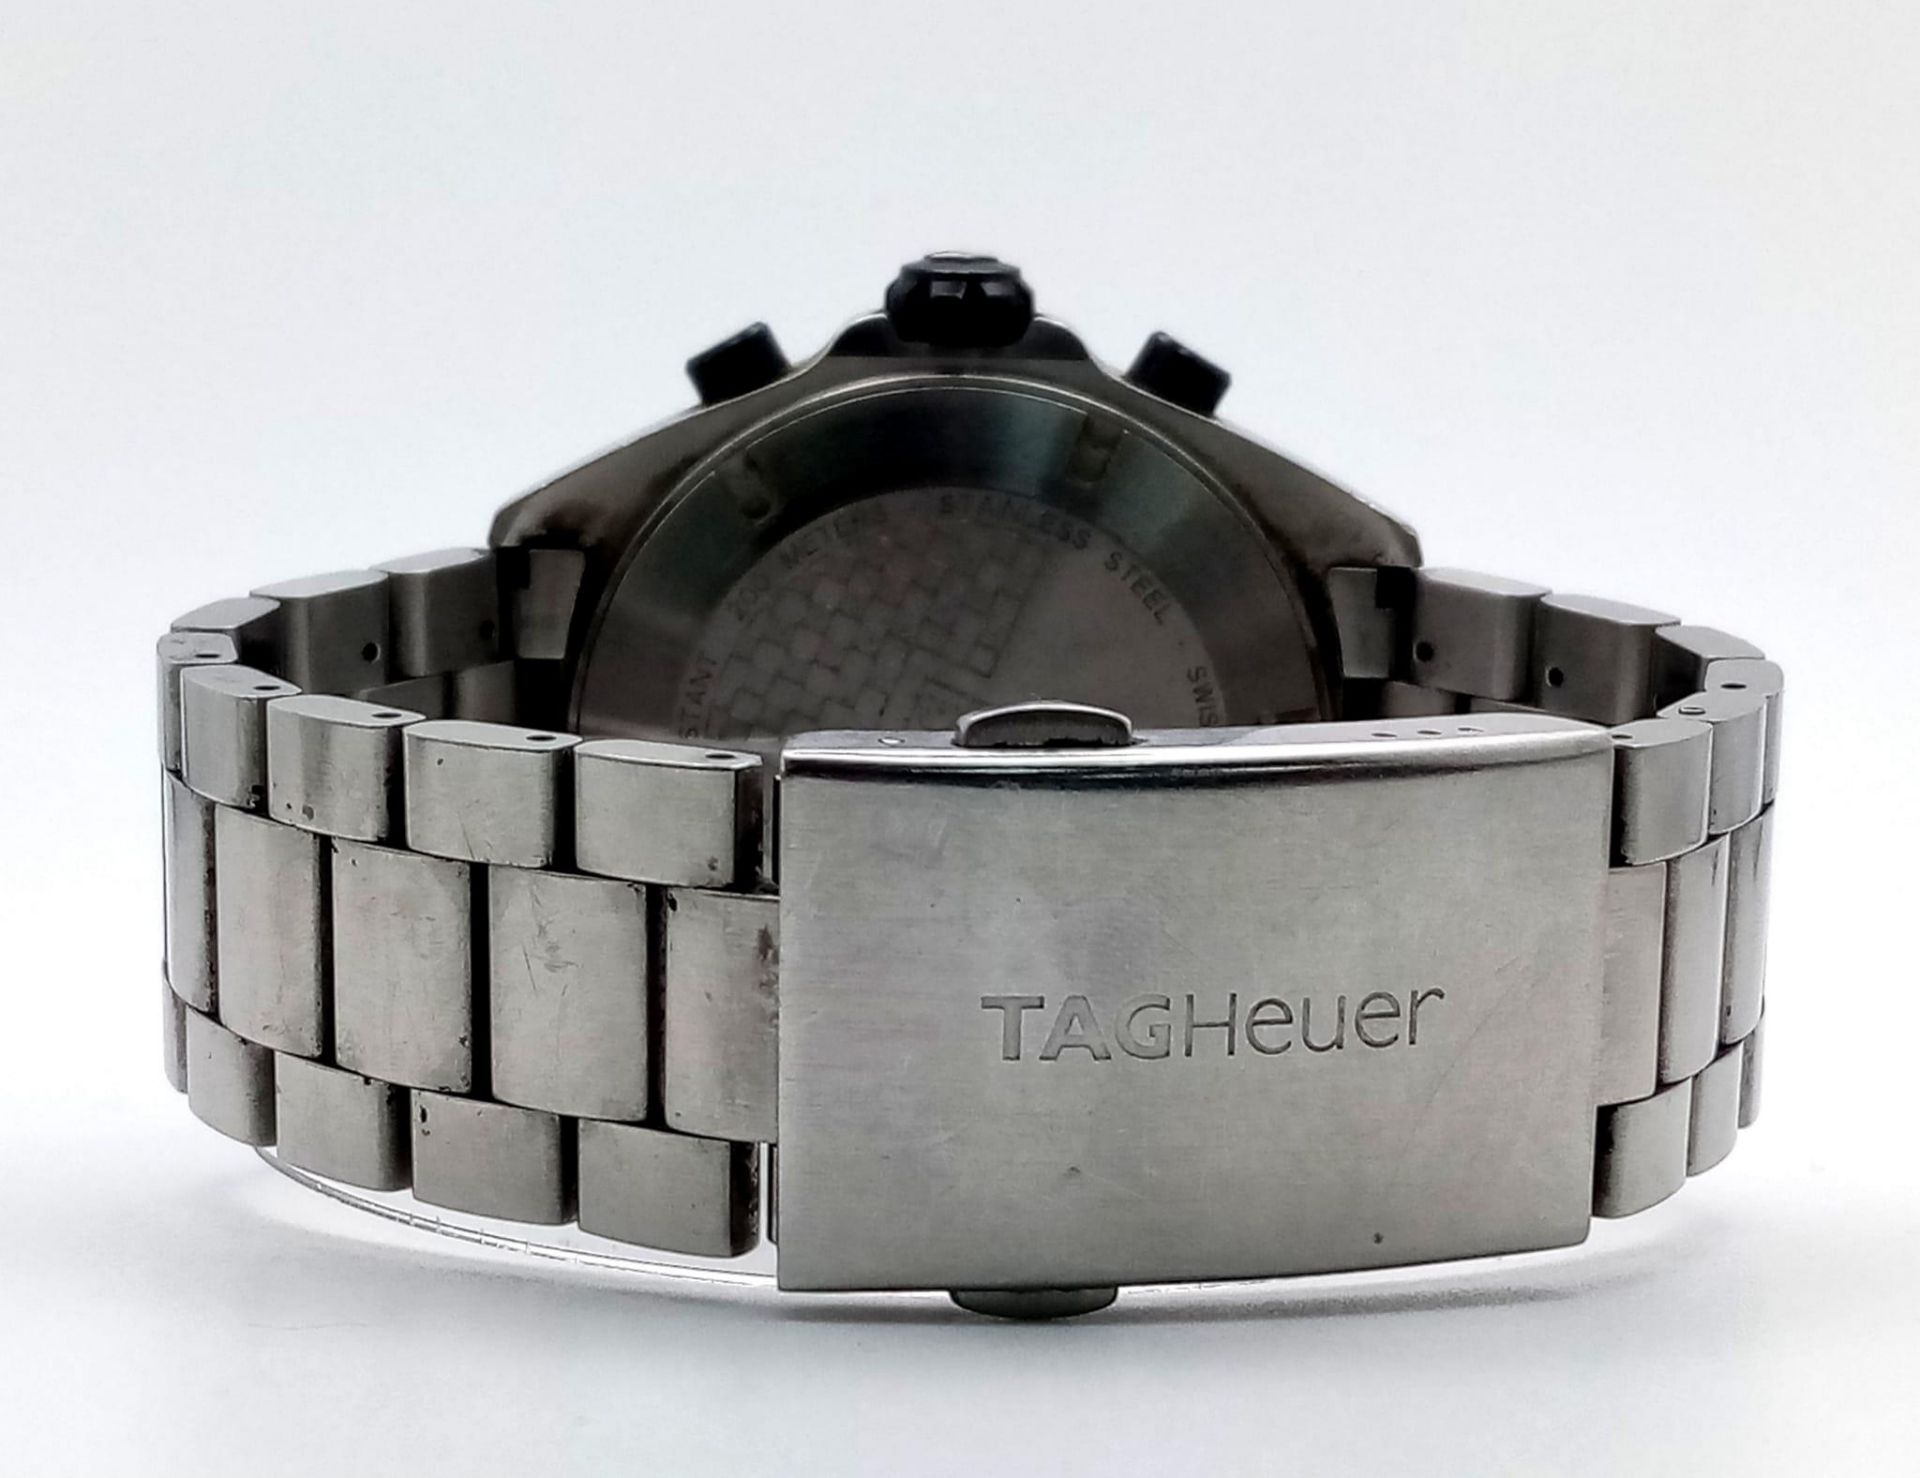 A Tag Heuer Formula Chronograph Gents Watch. Stainless steel bracelet and case - 43mm. Black dial - Image 5 of 7